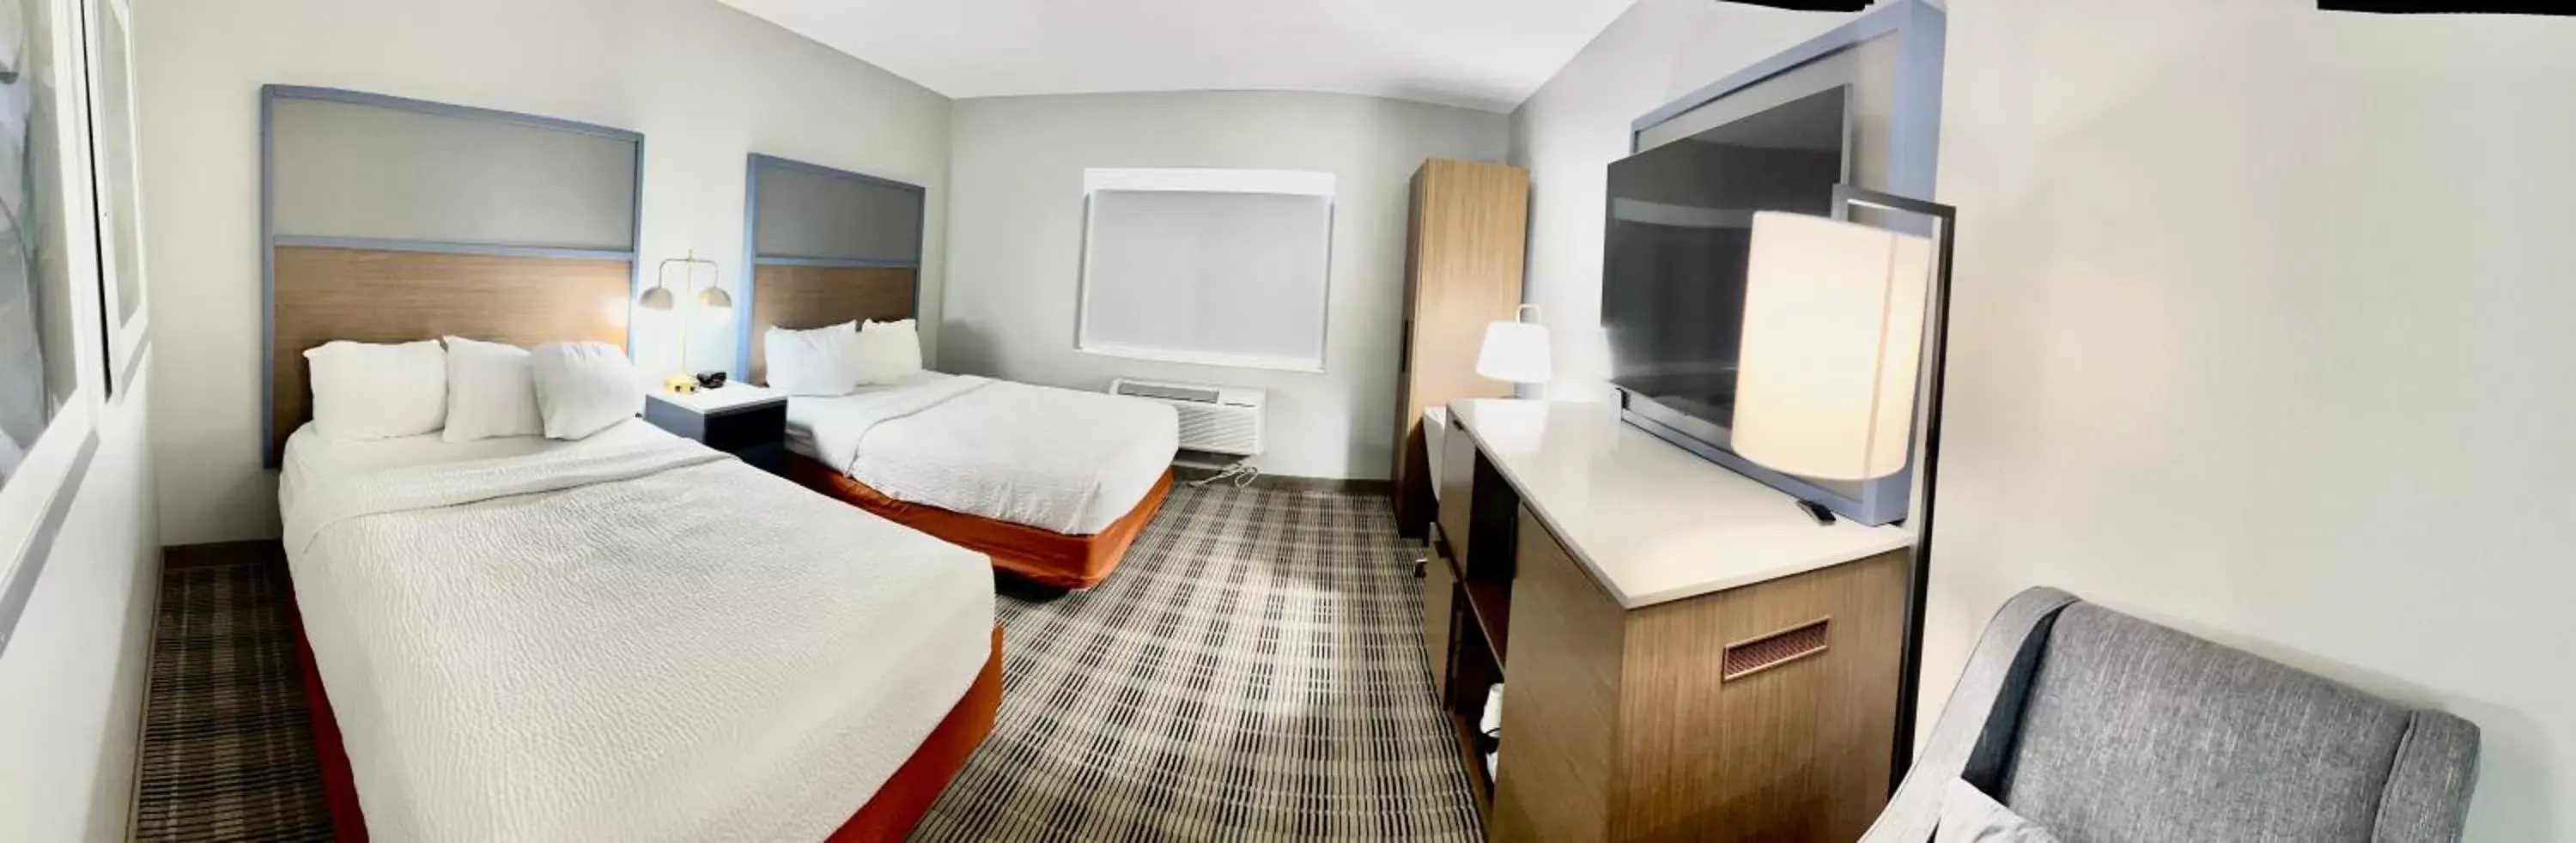 Deluxe Queen Room - Mobility Access/Non-Smoking in AmericInn by Wyndham Shakopee Near Canterbury Park